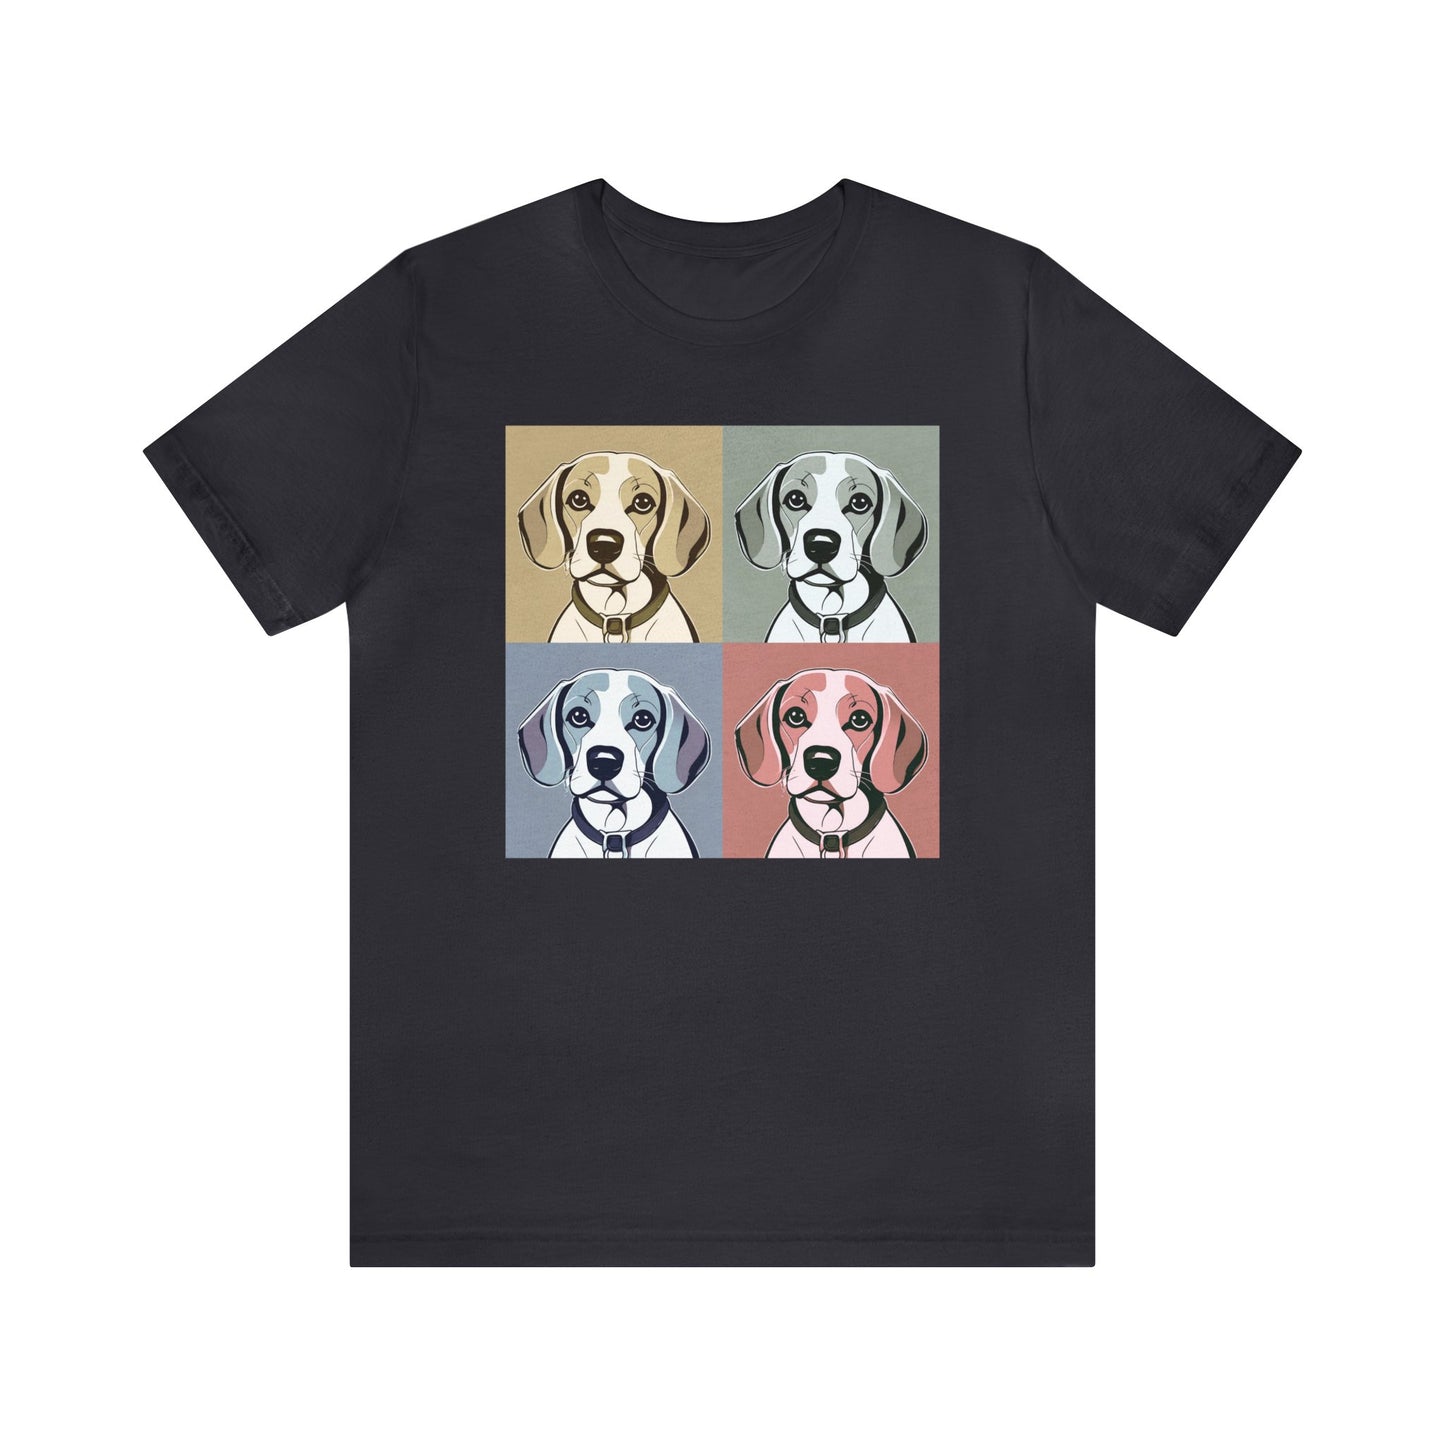 Beagle Tshirt, Black, ART Graphic T Shirt, Gifts for Her / Him, Dog Lovers Cute Cool Artistic